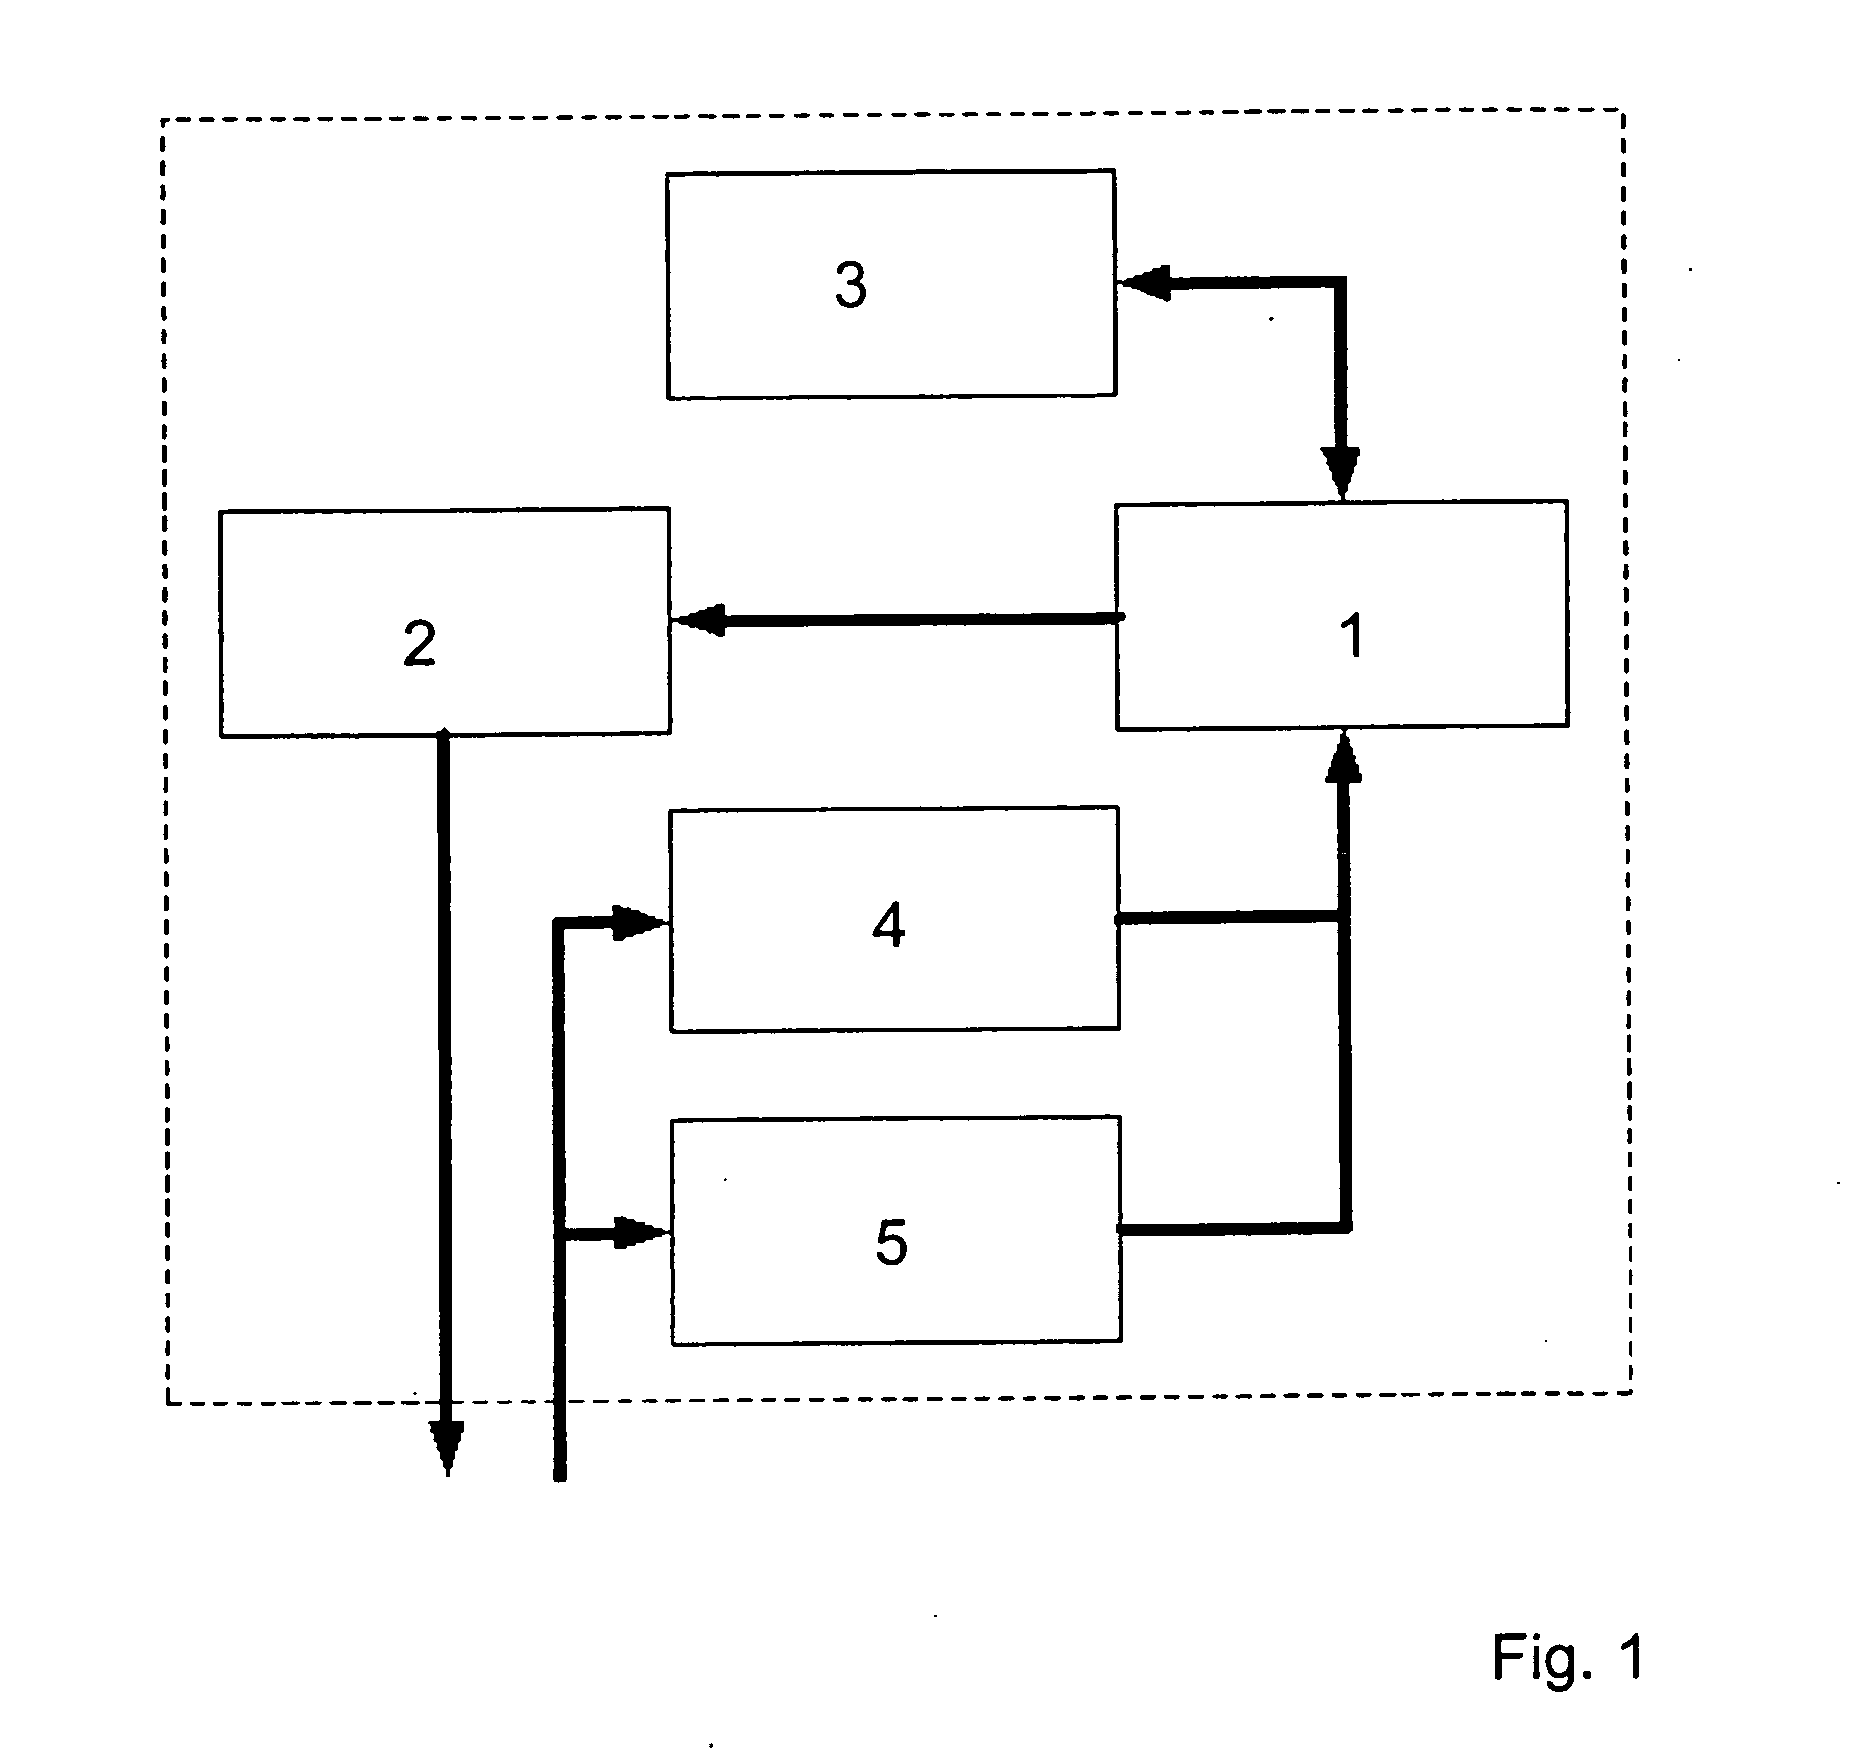 Steering assistance method and device for a motor vehicle